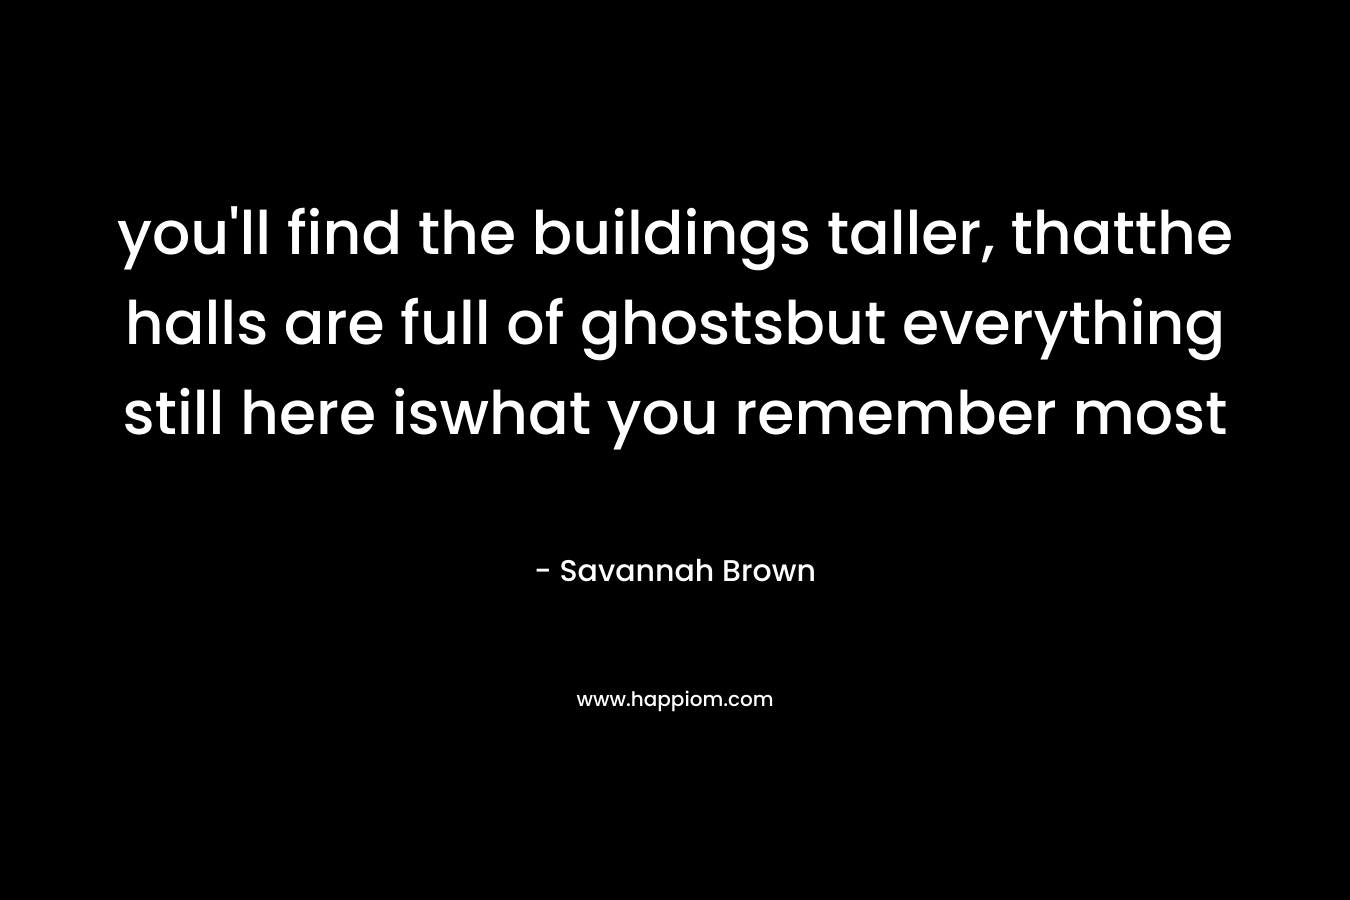 you’ll find the buildings taller, thatthe halls are full of ghostsbut everything still here iswhat you remember most – Savannah Brown